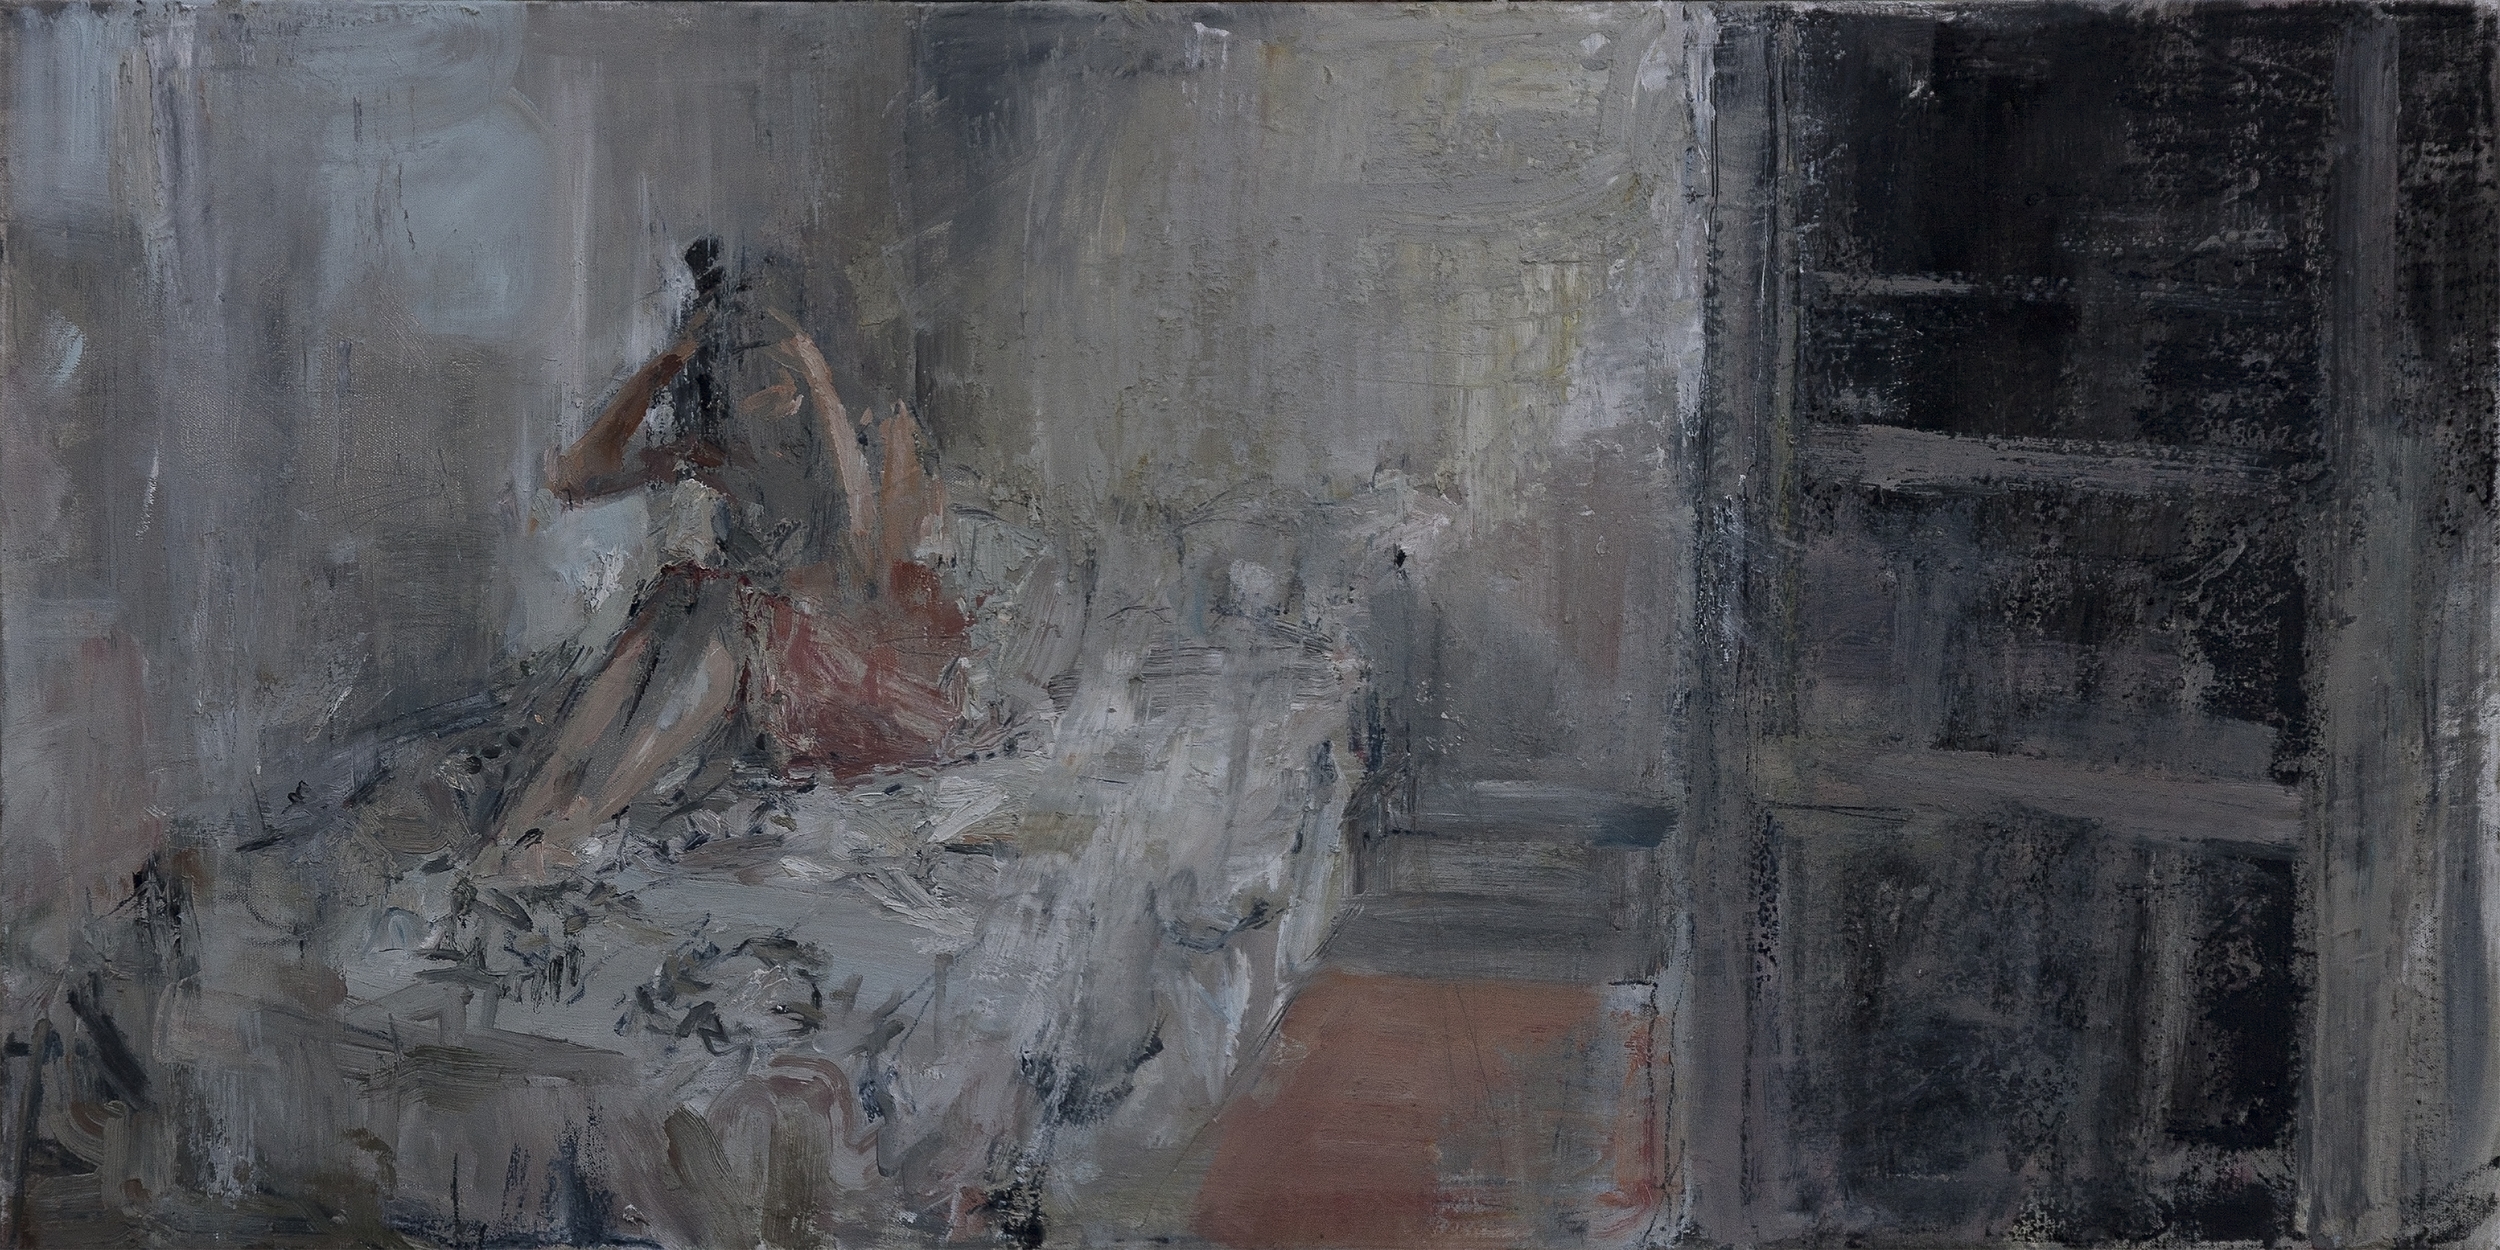 Bedroom2_24x48inches_oil on canvas.jpg